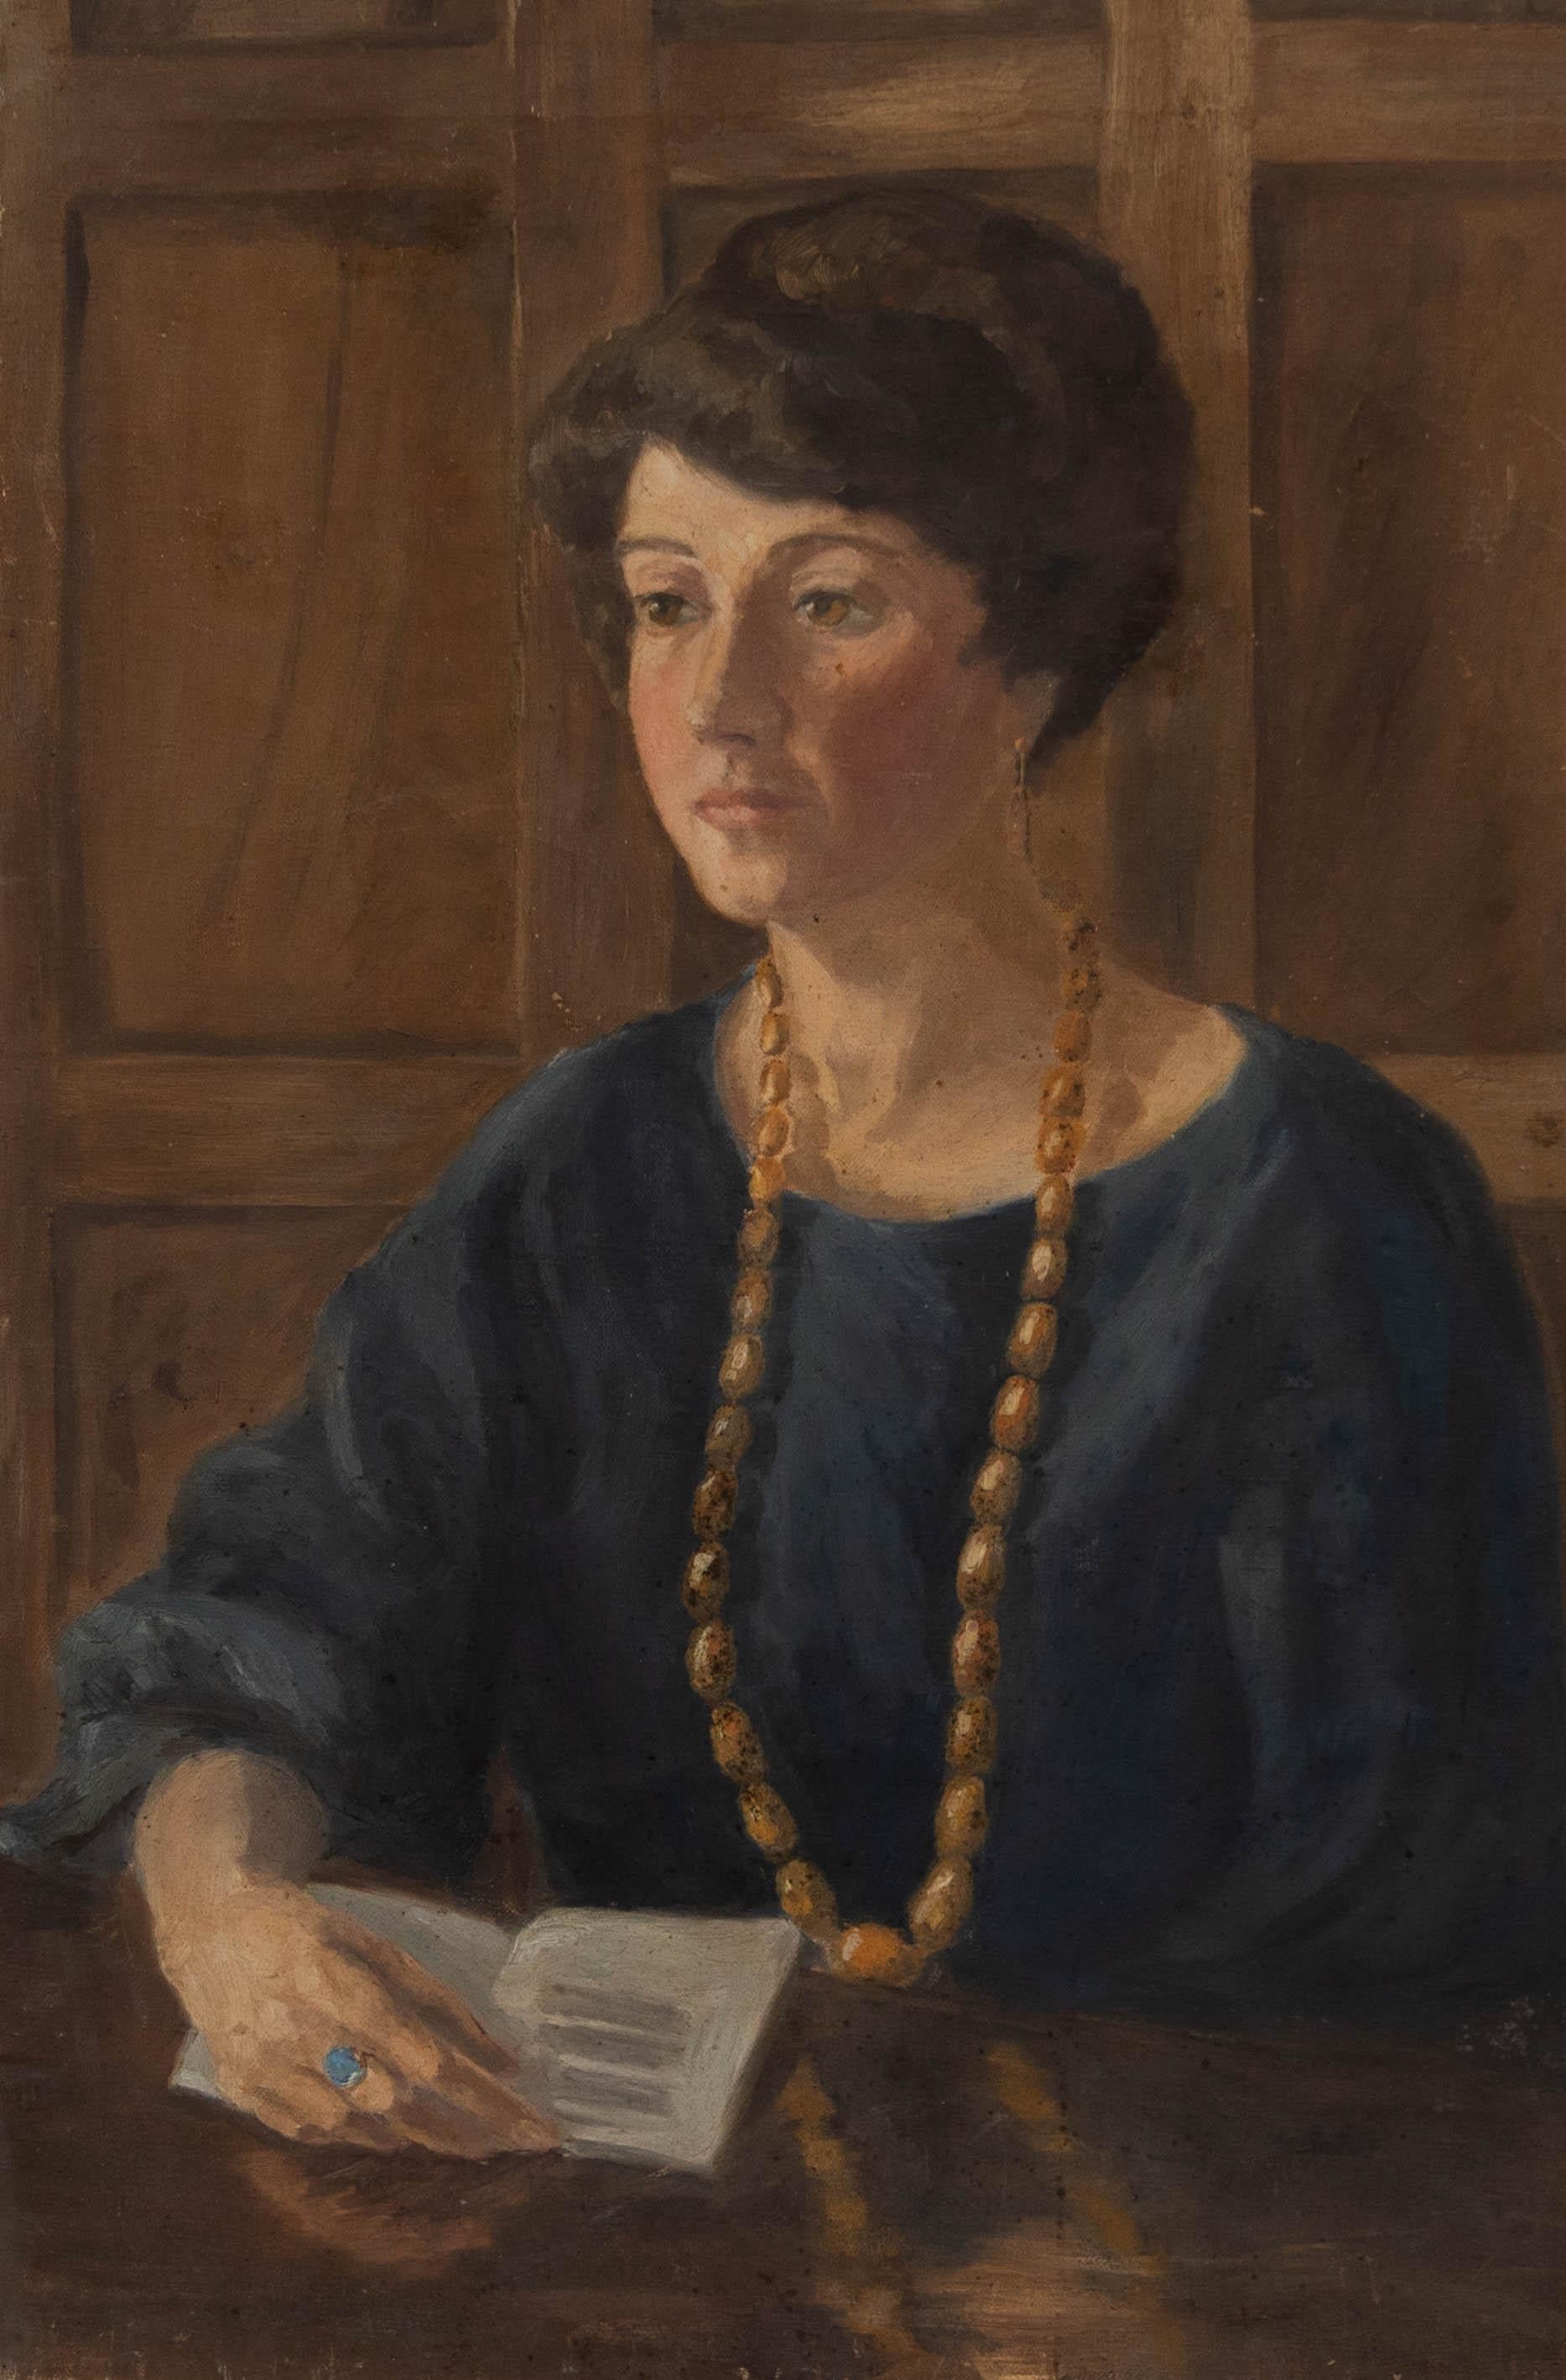 Unknown Portrait Painting - Gerald Trice Martin (1893-1961)- Early 20th Century Oil, Lady with Bead Necklace